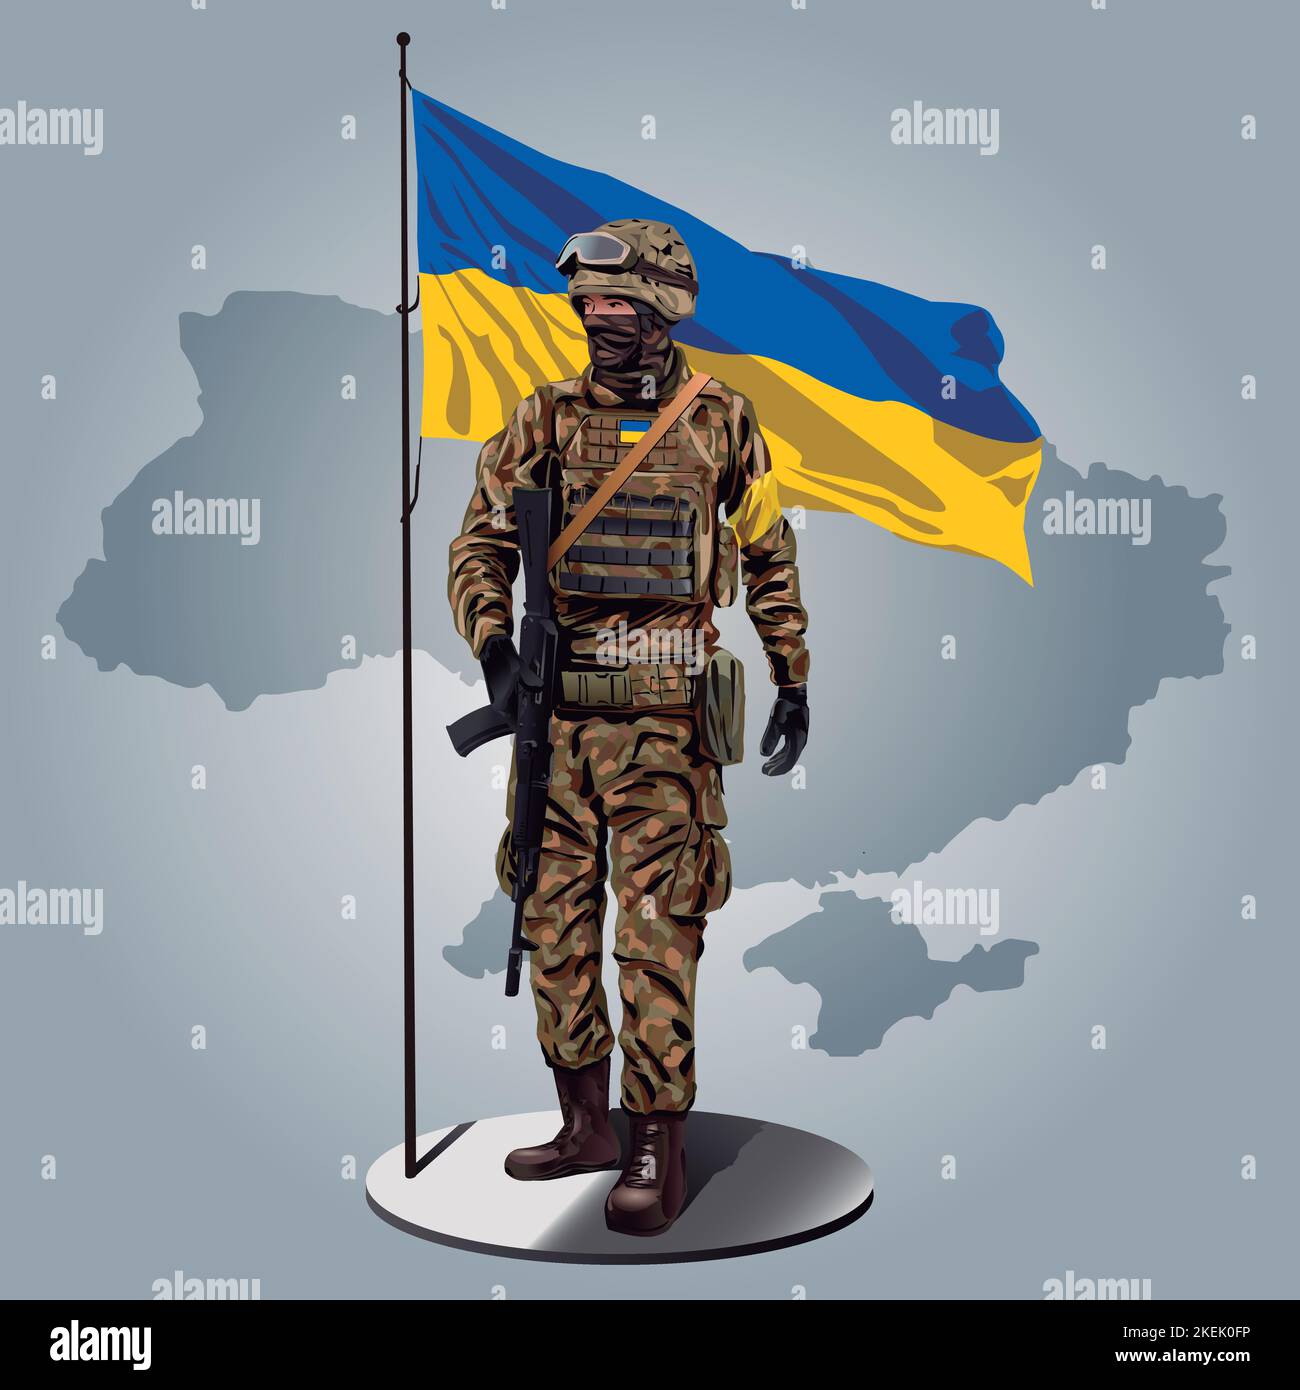 ukrainian soldier with ukrainian flag and map behind. Stock Vector